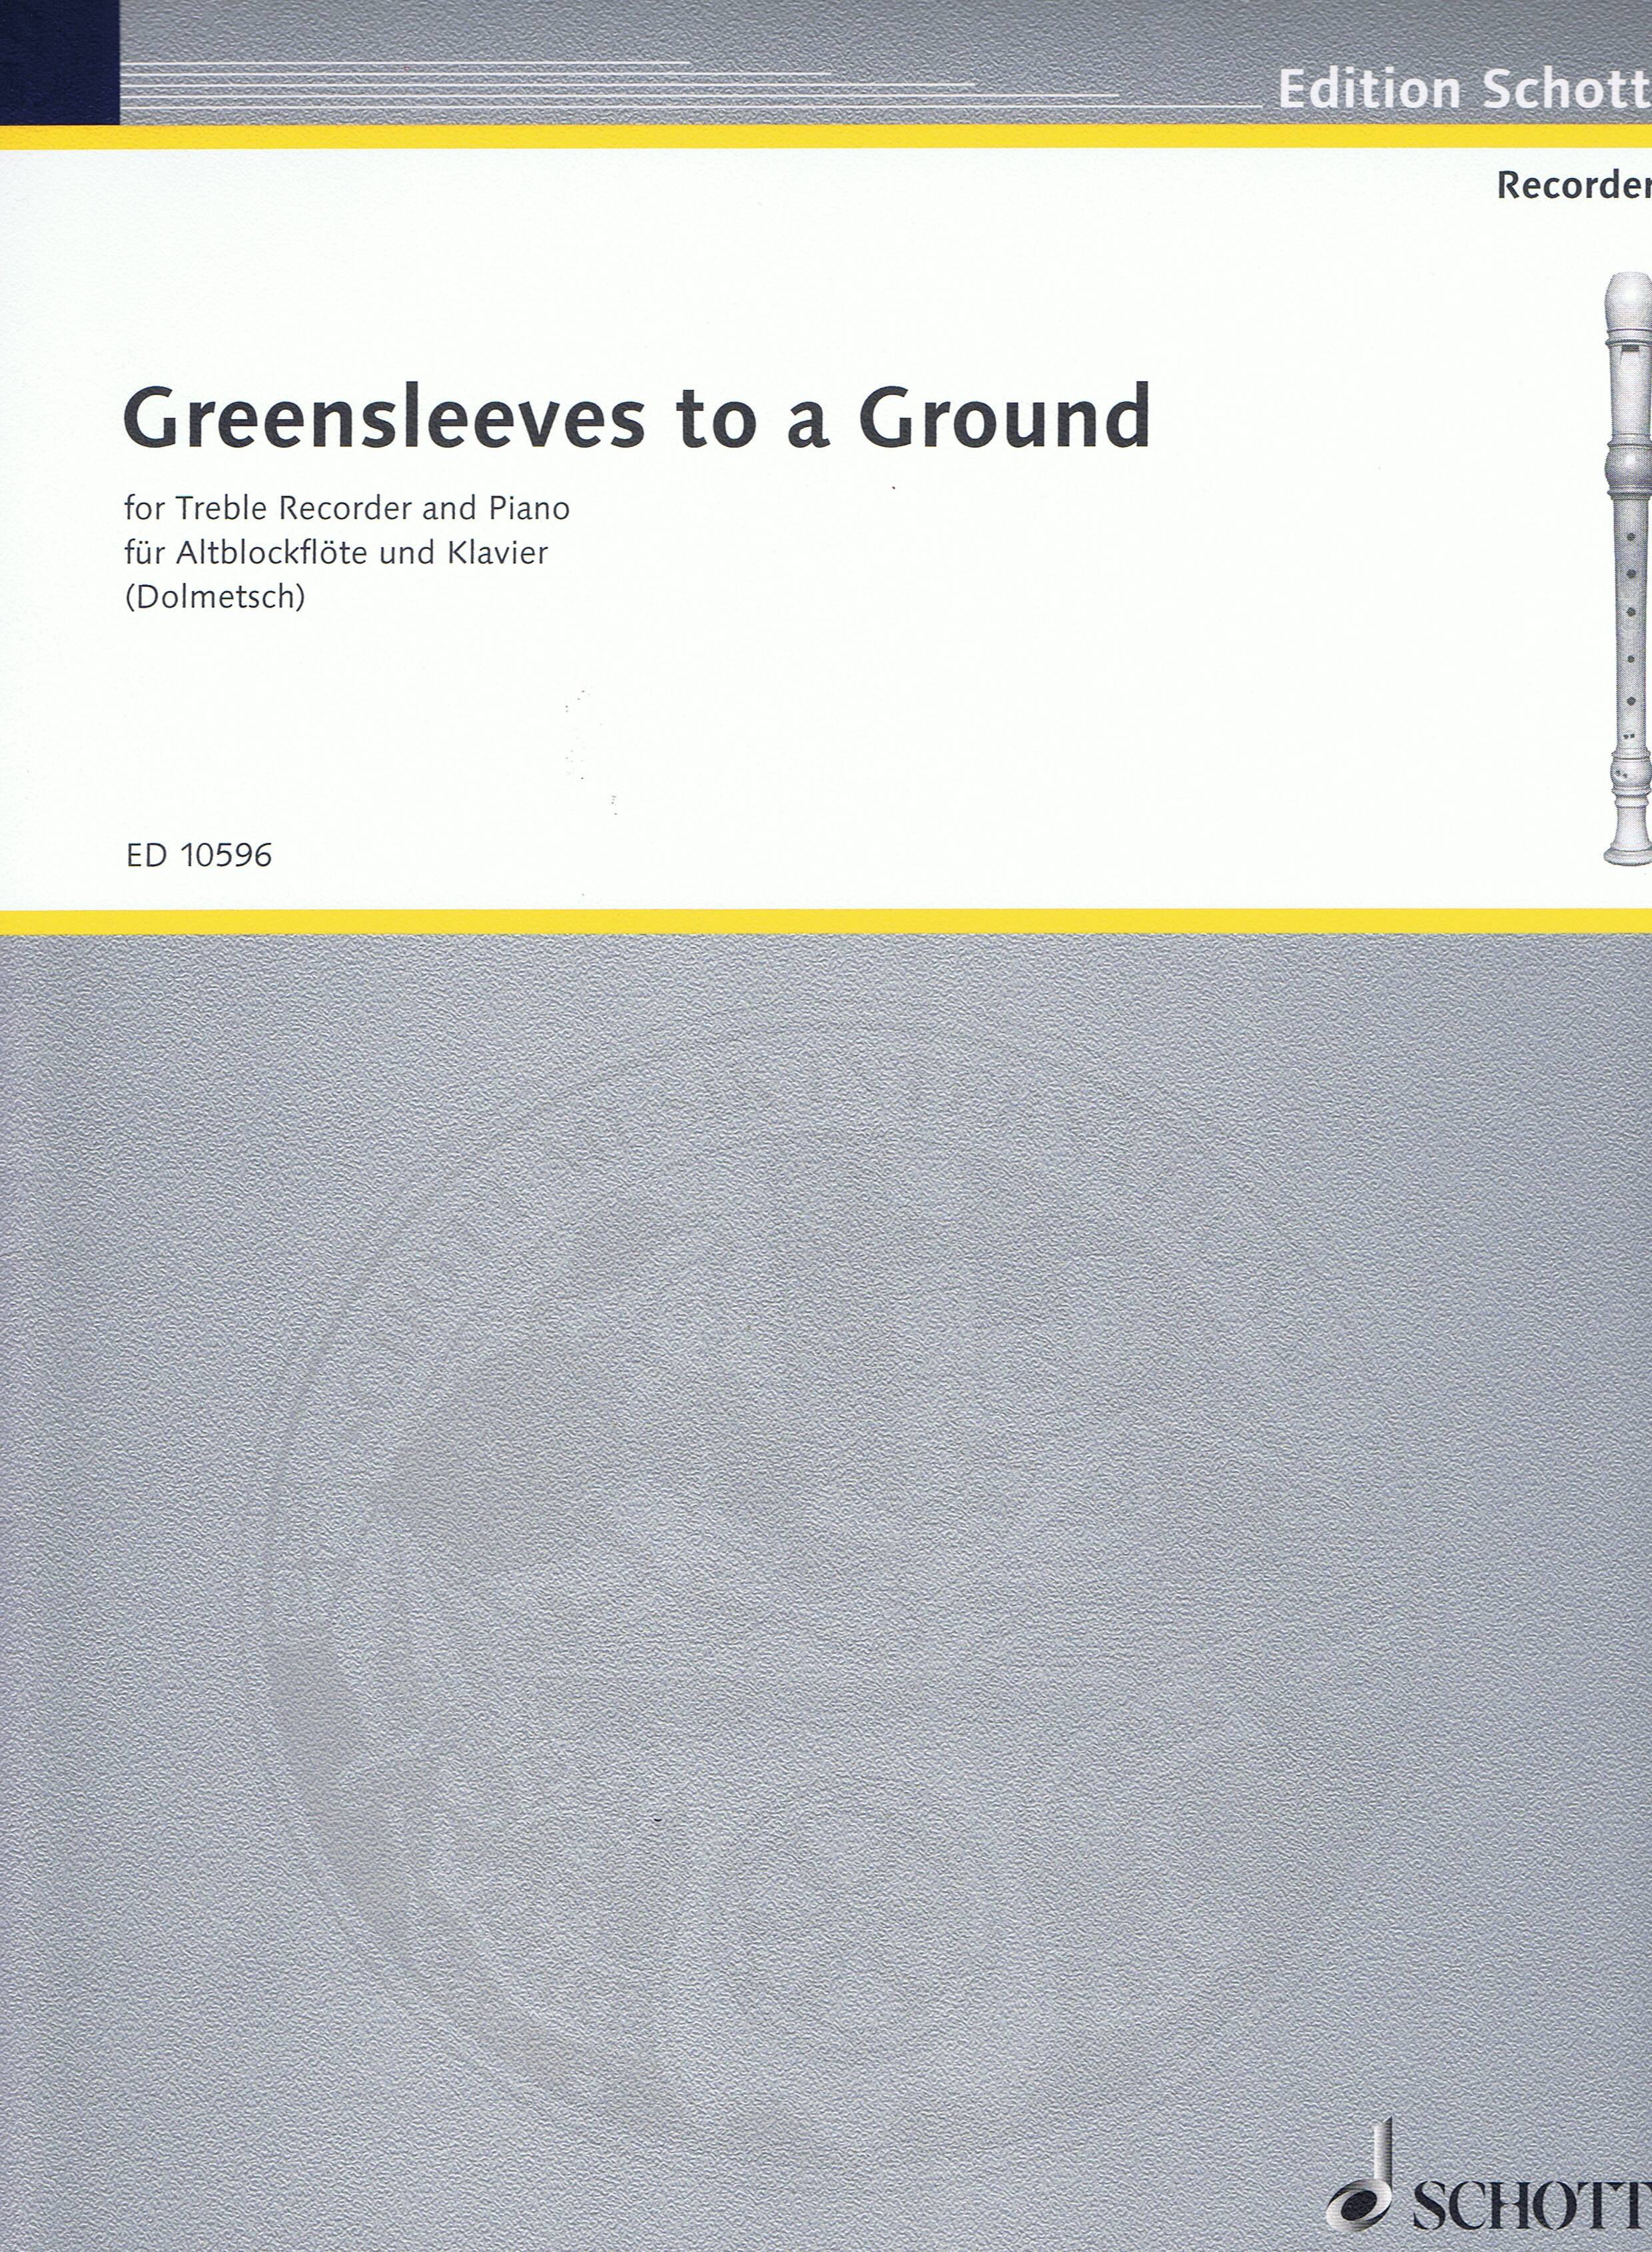 Arnold Dolmetsch: Greensleeves to a Ground: Descant Recorder: Score and Parts